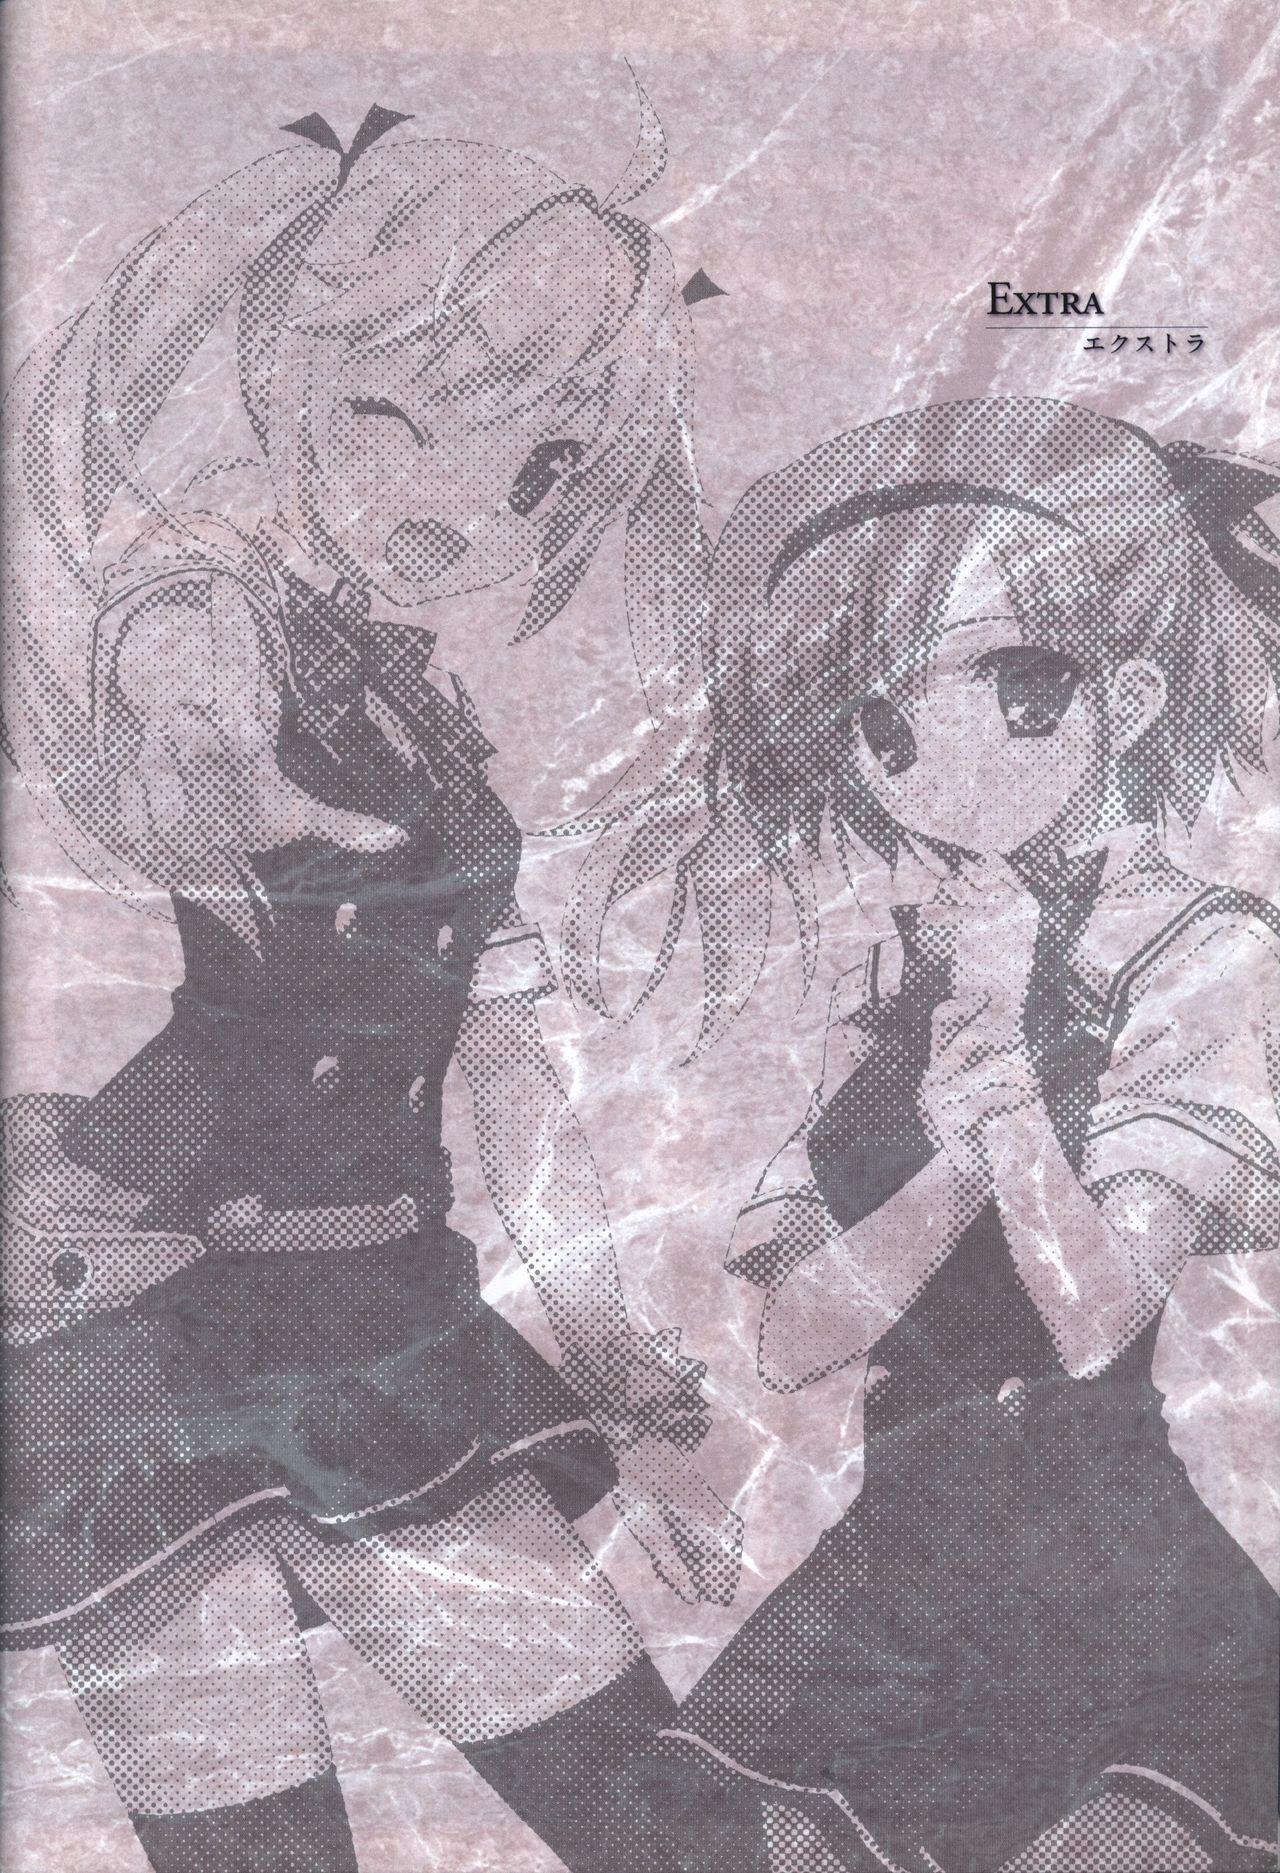 The Fruit of Grisaia Visual FanBook 117